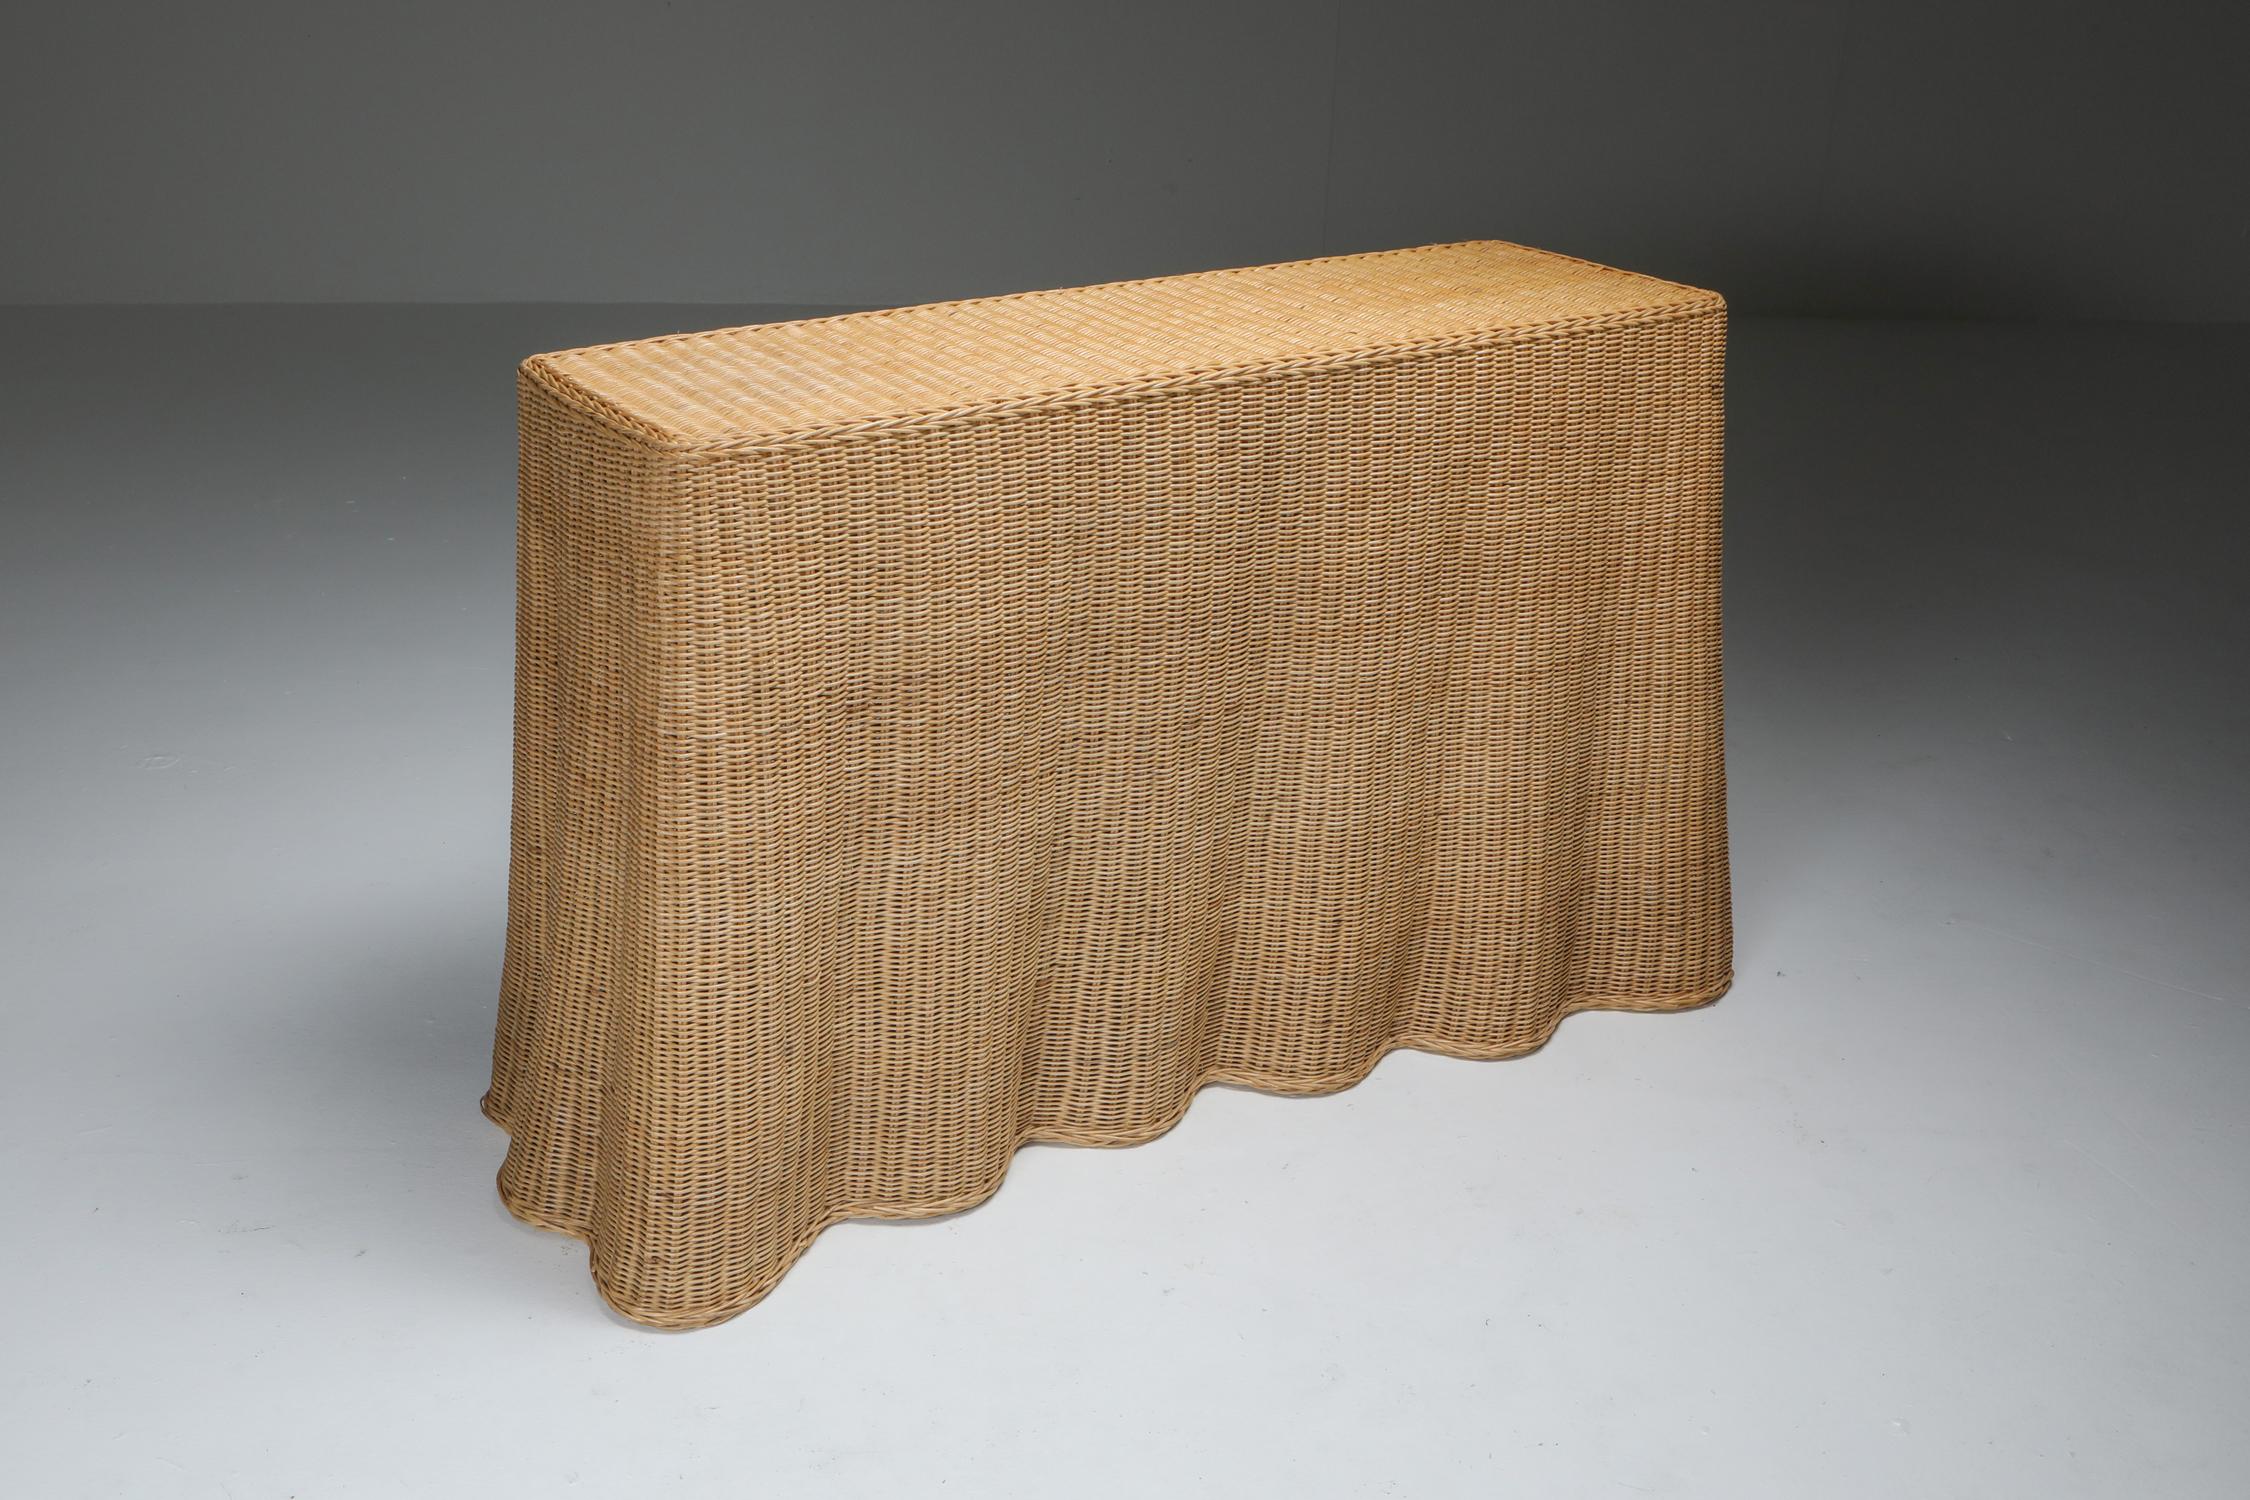 Console table in wicker, tropicalist, Hollywood Regency, India Mahdavi

Rare trompe l'Oeil wicker console table with 